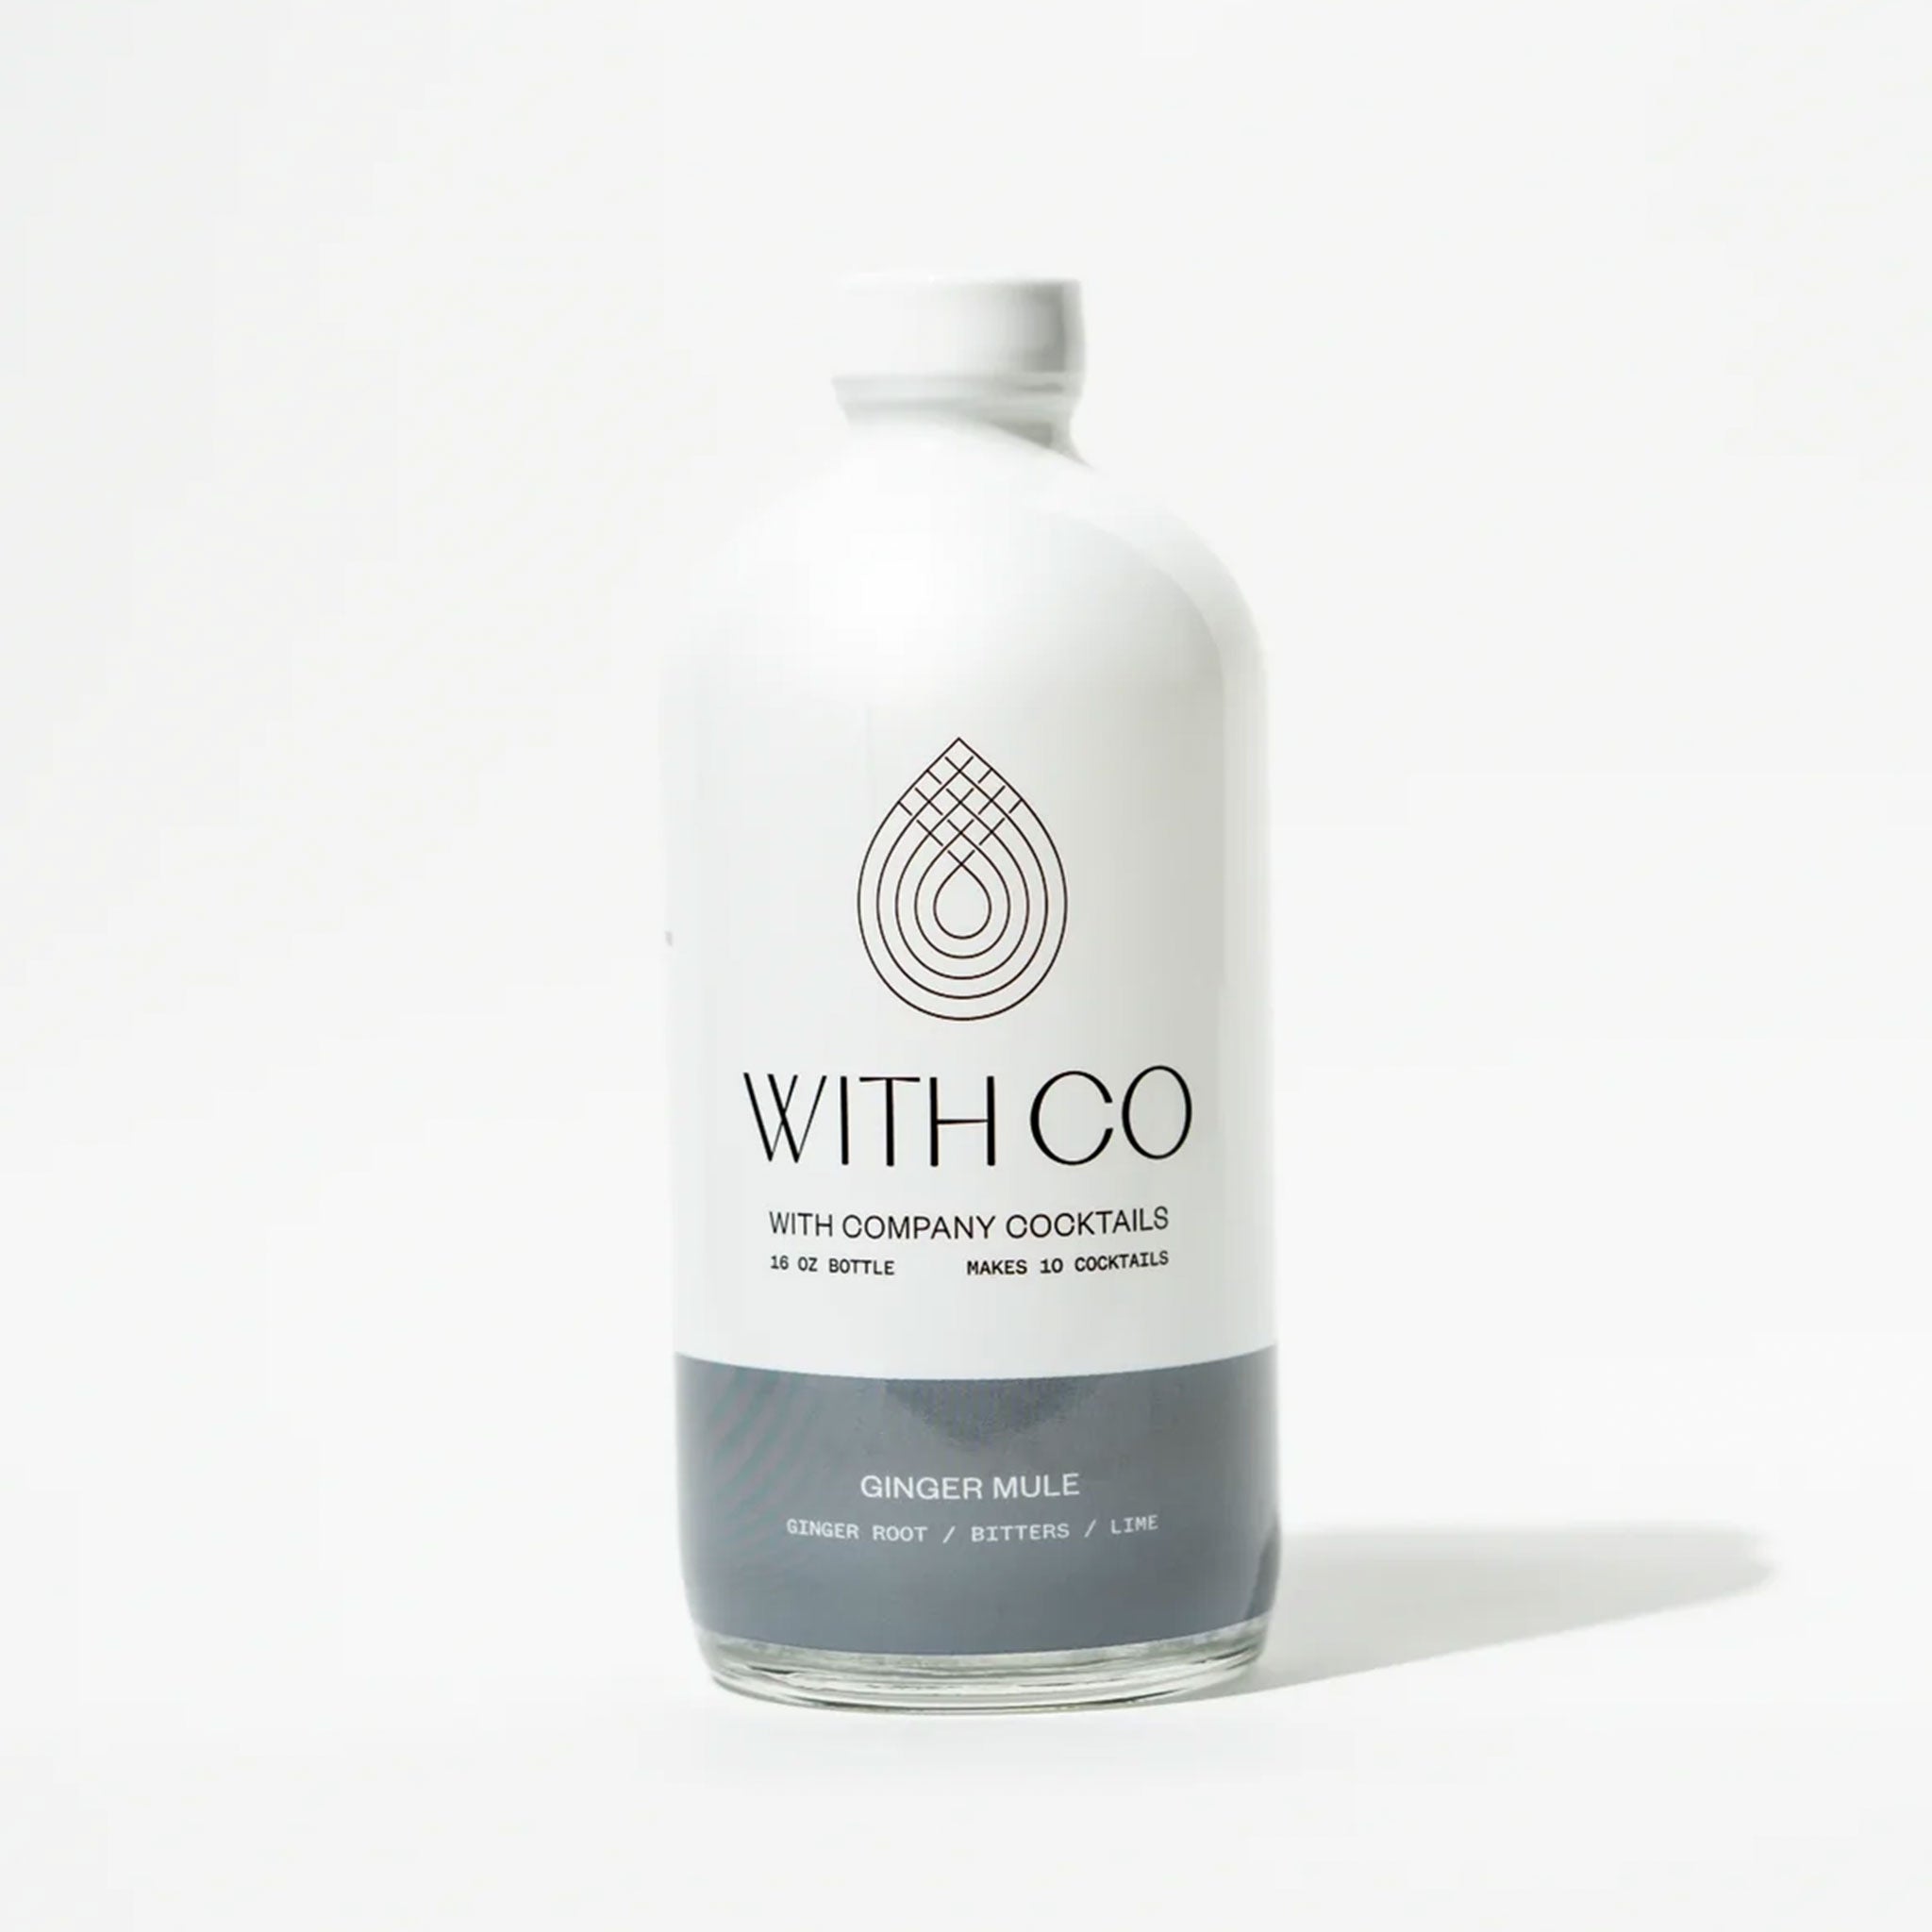 A white bottle of ginger mule cocktail mix with a grey bottom half and the brand "With Co" in black text across the center of the bottle.